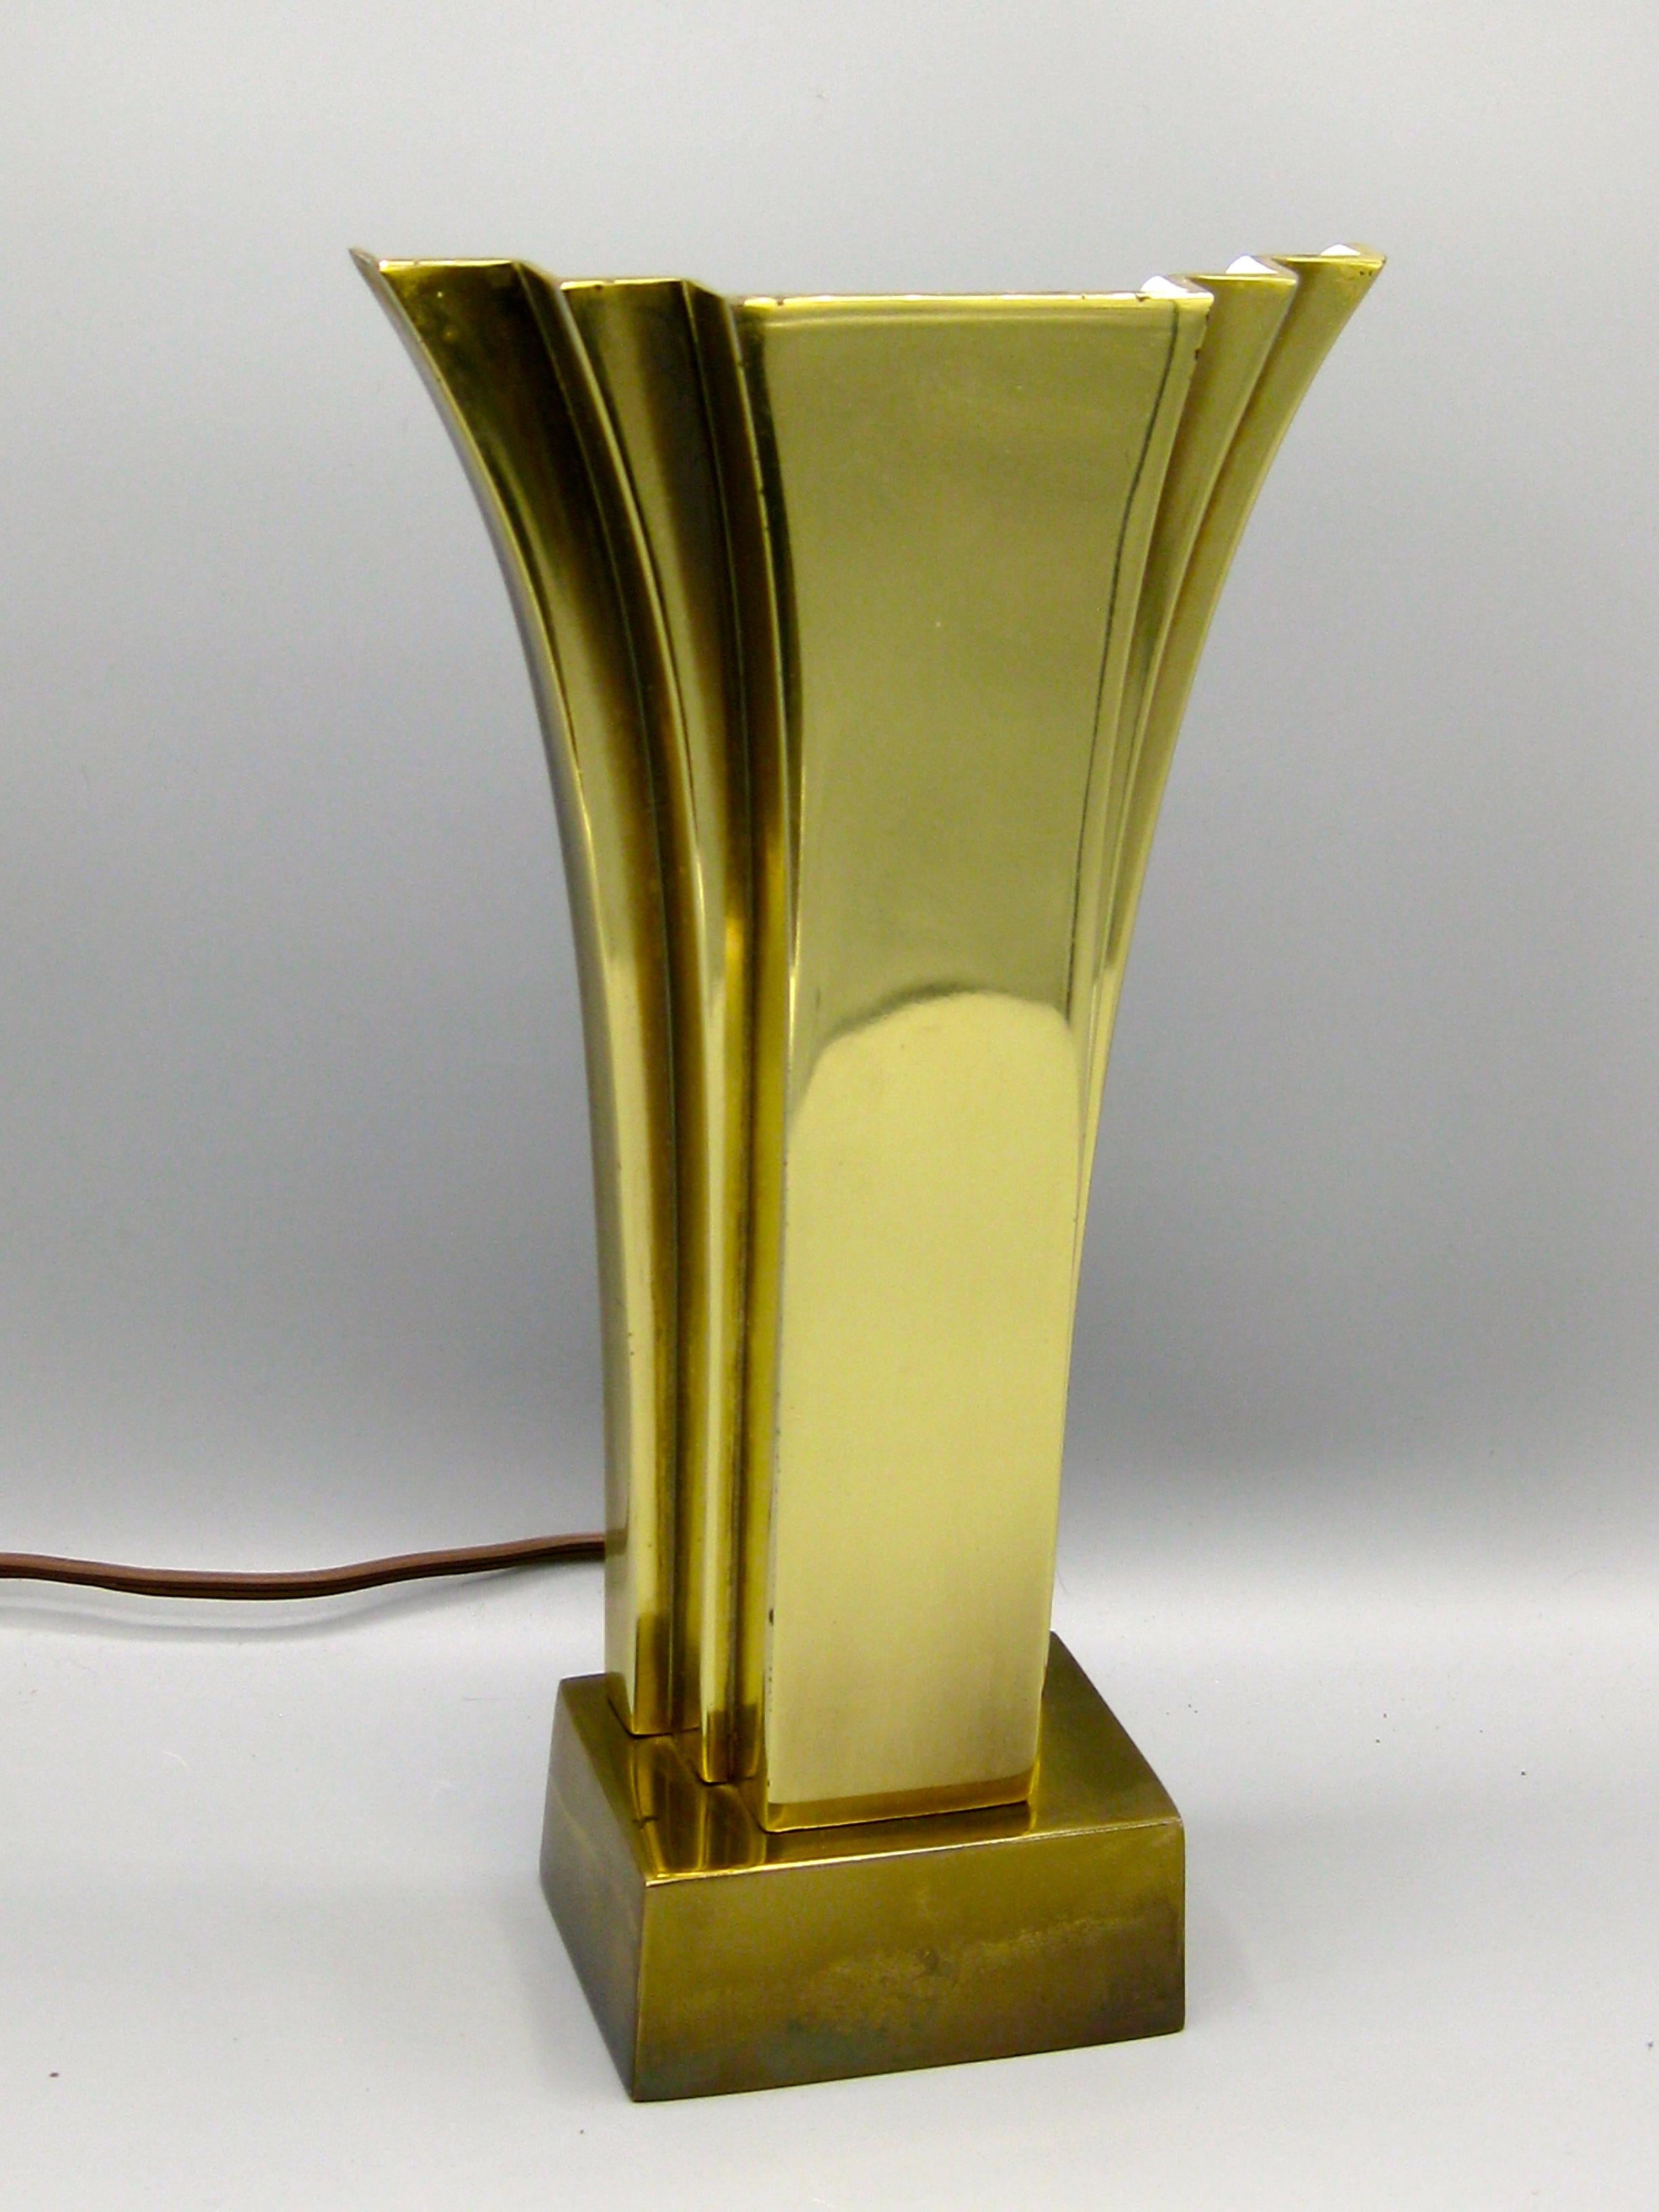 Wonderful Stiffel Art Deco Revival brass table or desk lamp, circa 1970s. The lamp is in the shape of a fan and creates a wonderful uplight. Works as it should. In very nice condition. No cracks, no repairs and no dents. Could be polished if